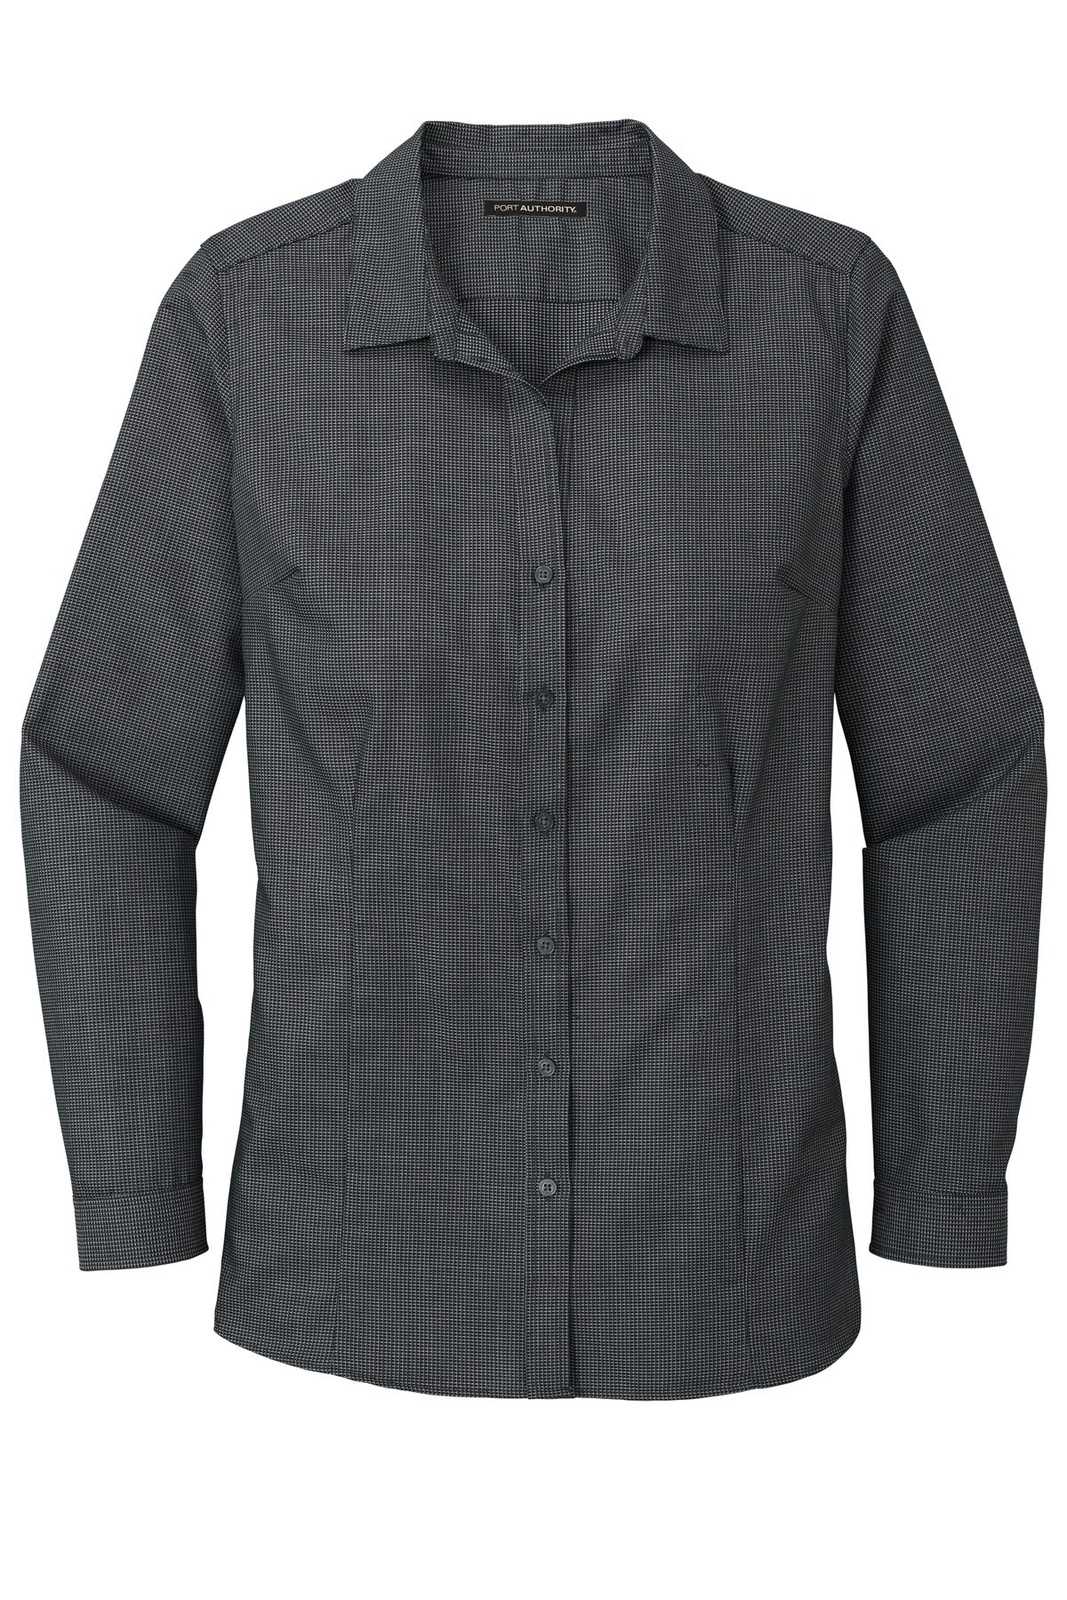 Port Authority LW645 Ladies Pincheck Easy Care Shirt - Black Gray Steel - HIT a Double - 4